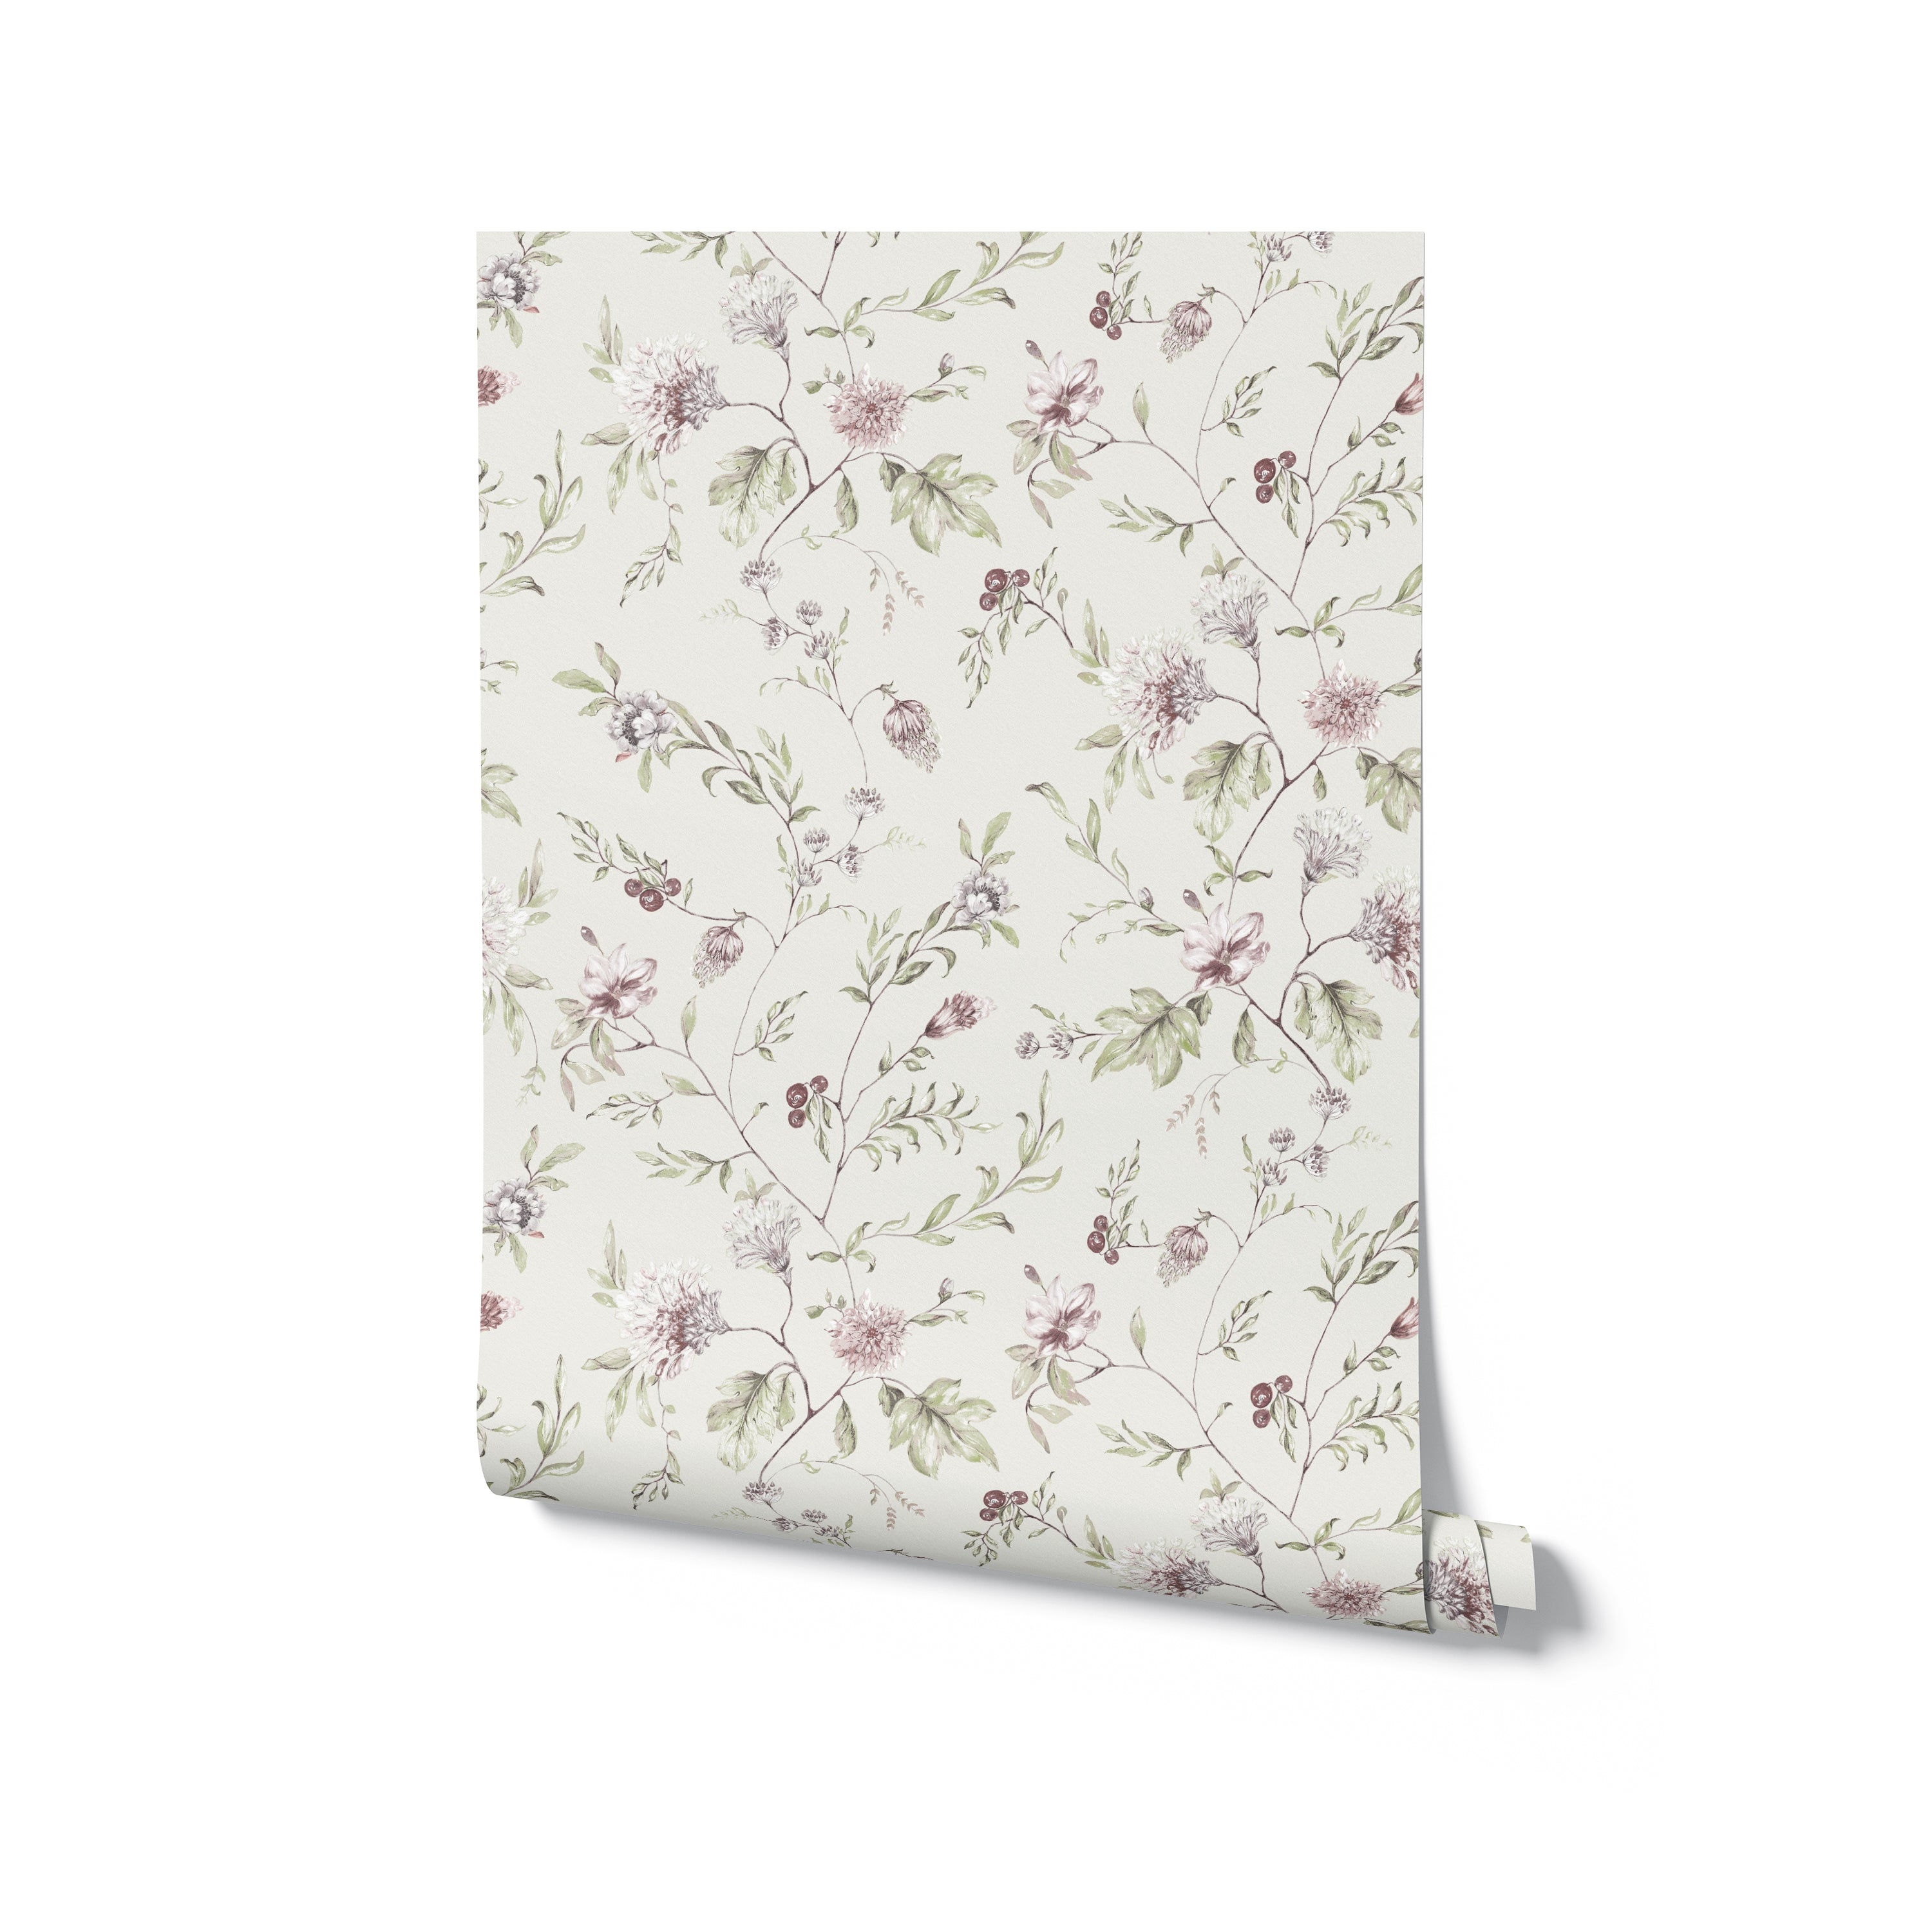 Rolled Irene Floral Wallpaper, illustrating the elegant floral design with detailed green leaves and soft pink flowers, perfect for adding a touch of nature-inspired beauty to any room.